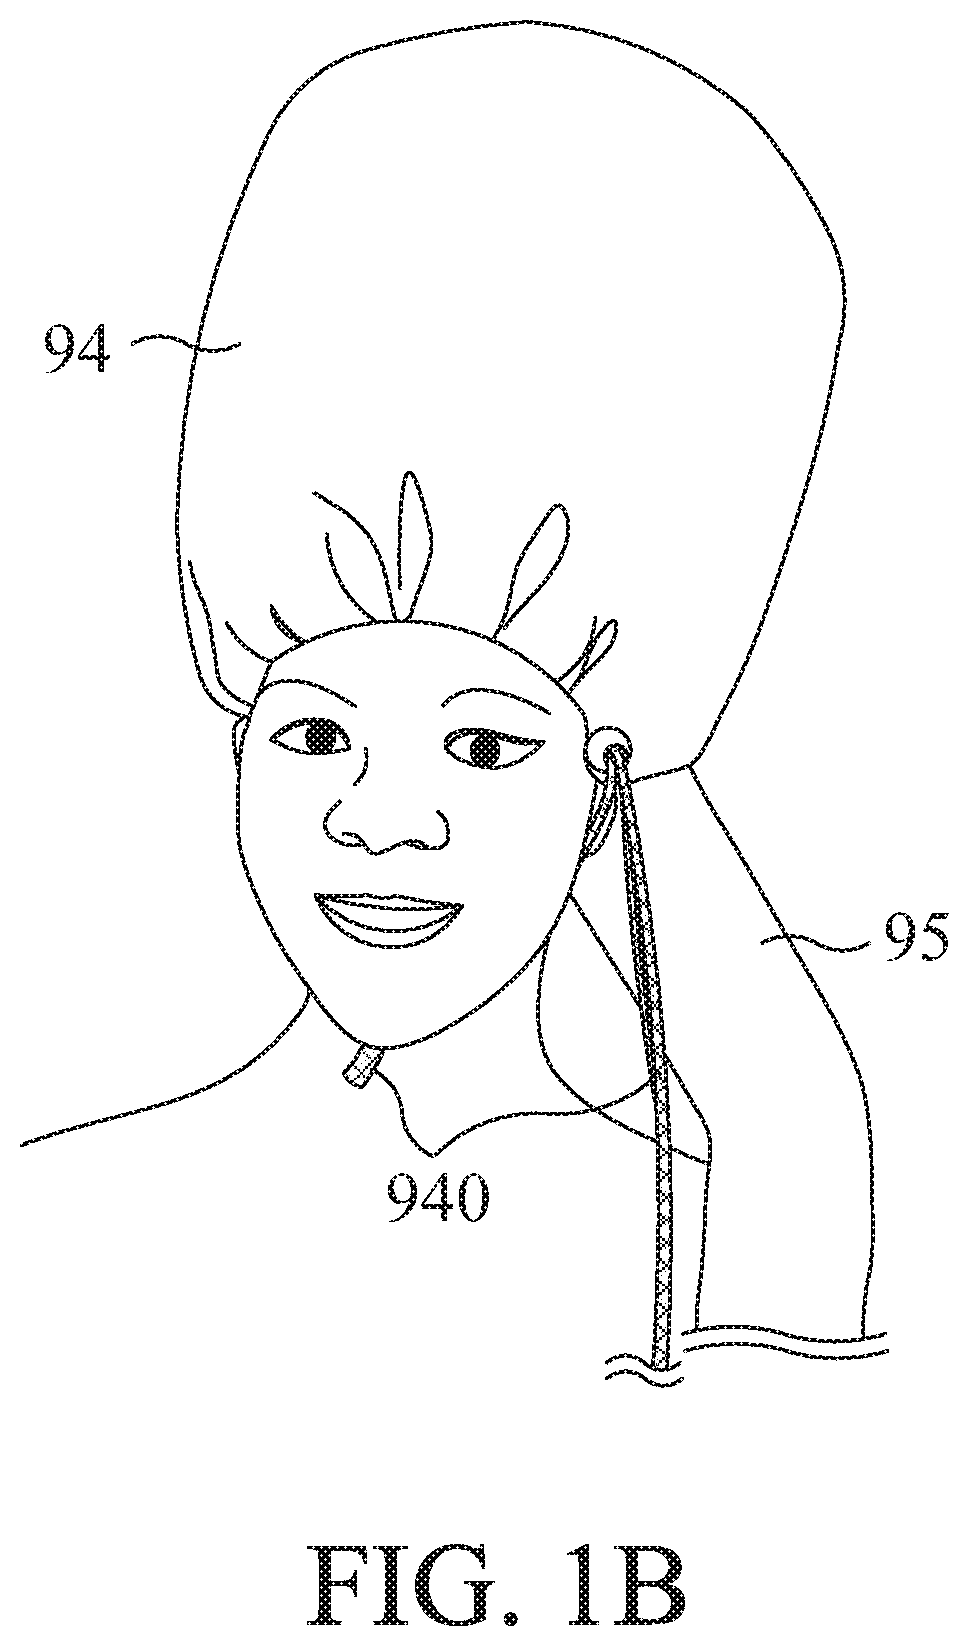 Hair-drying hood and hair treatment device including the same